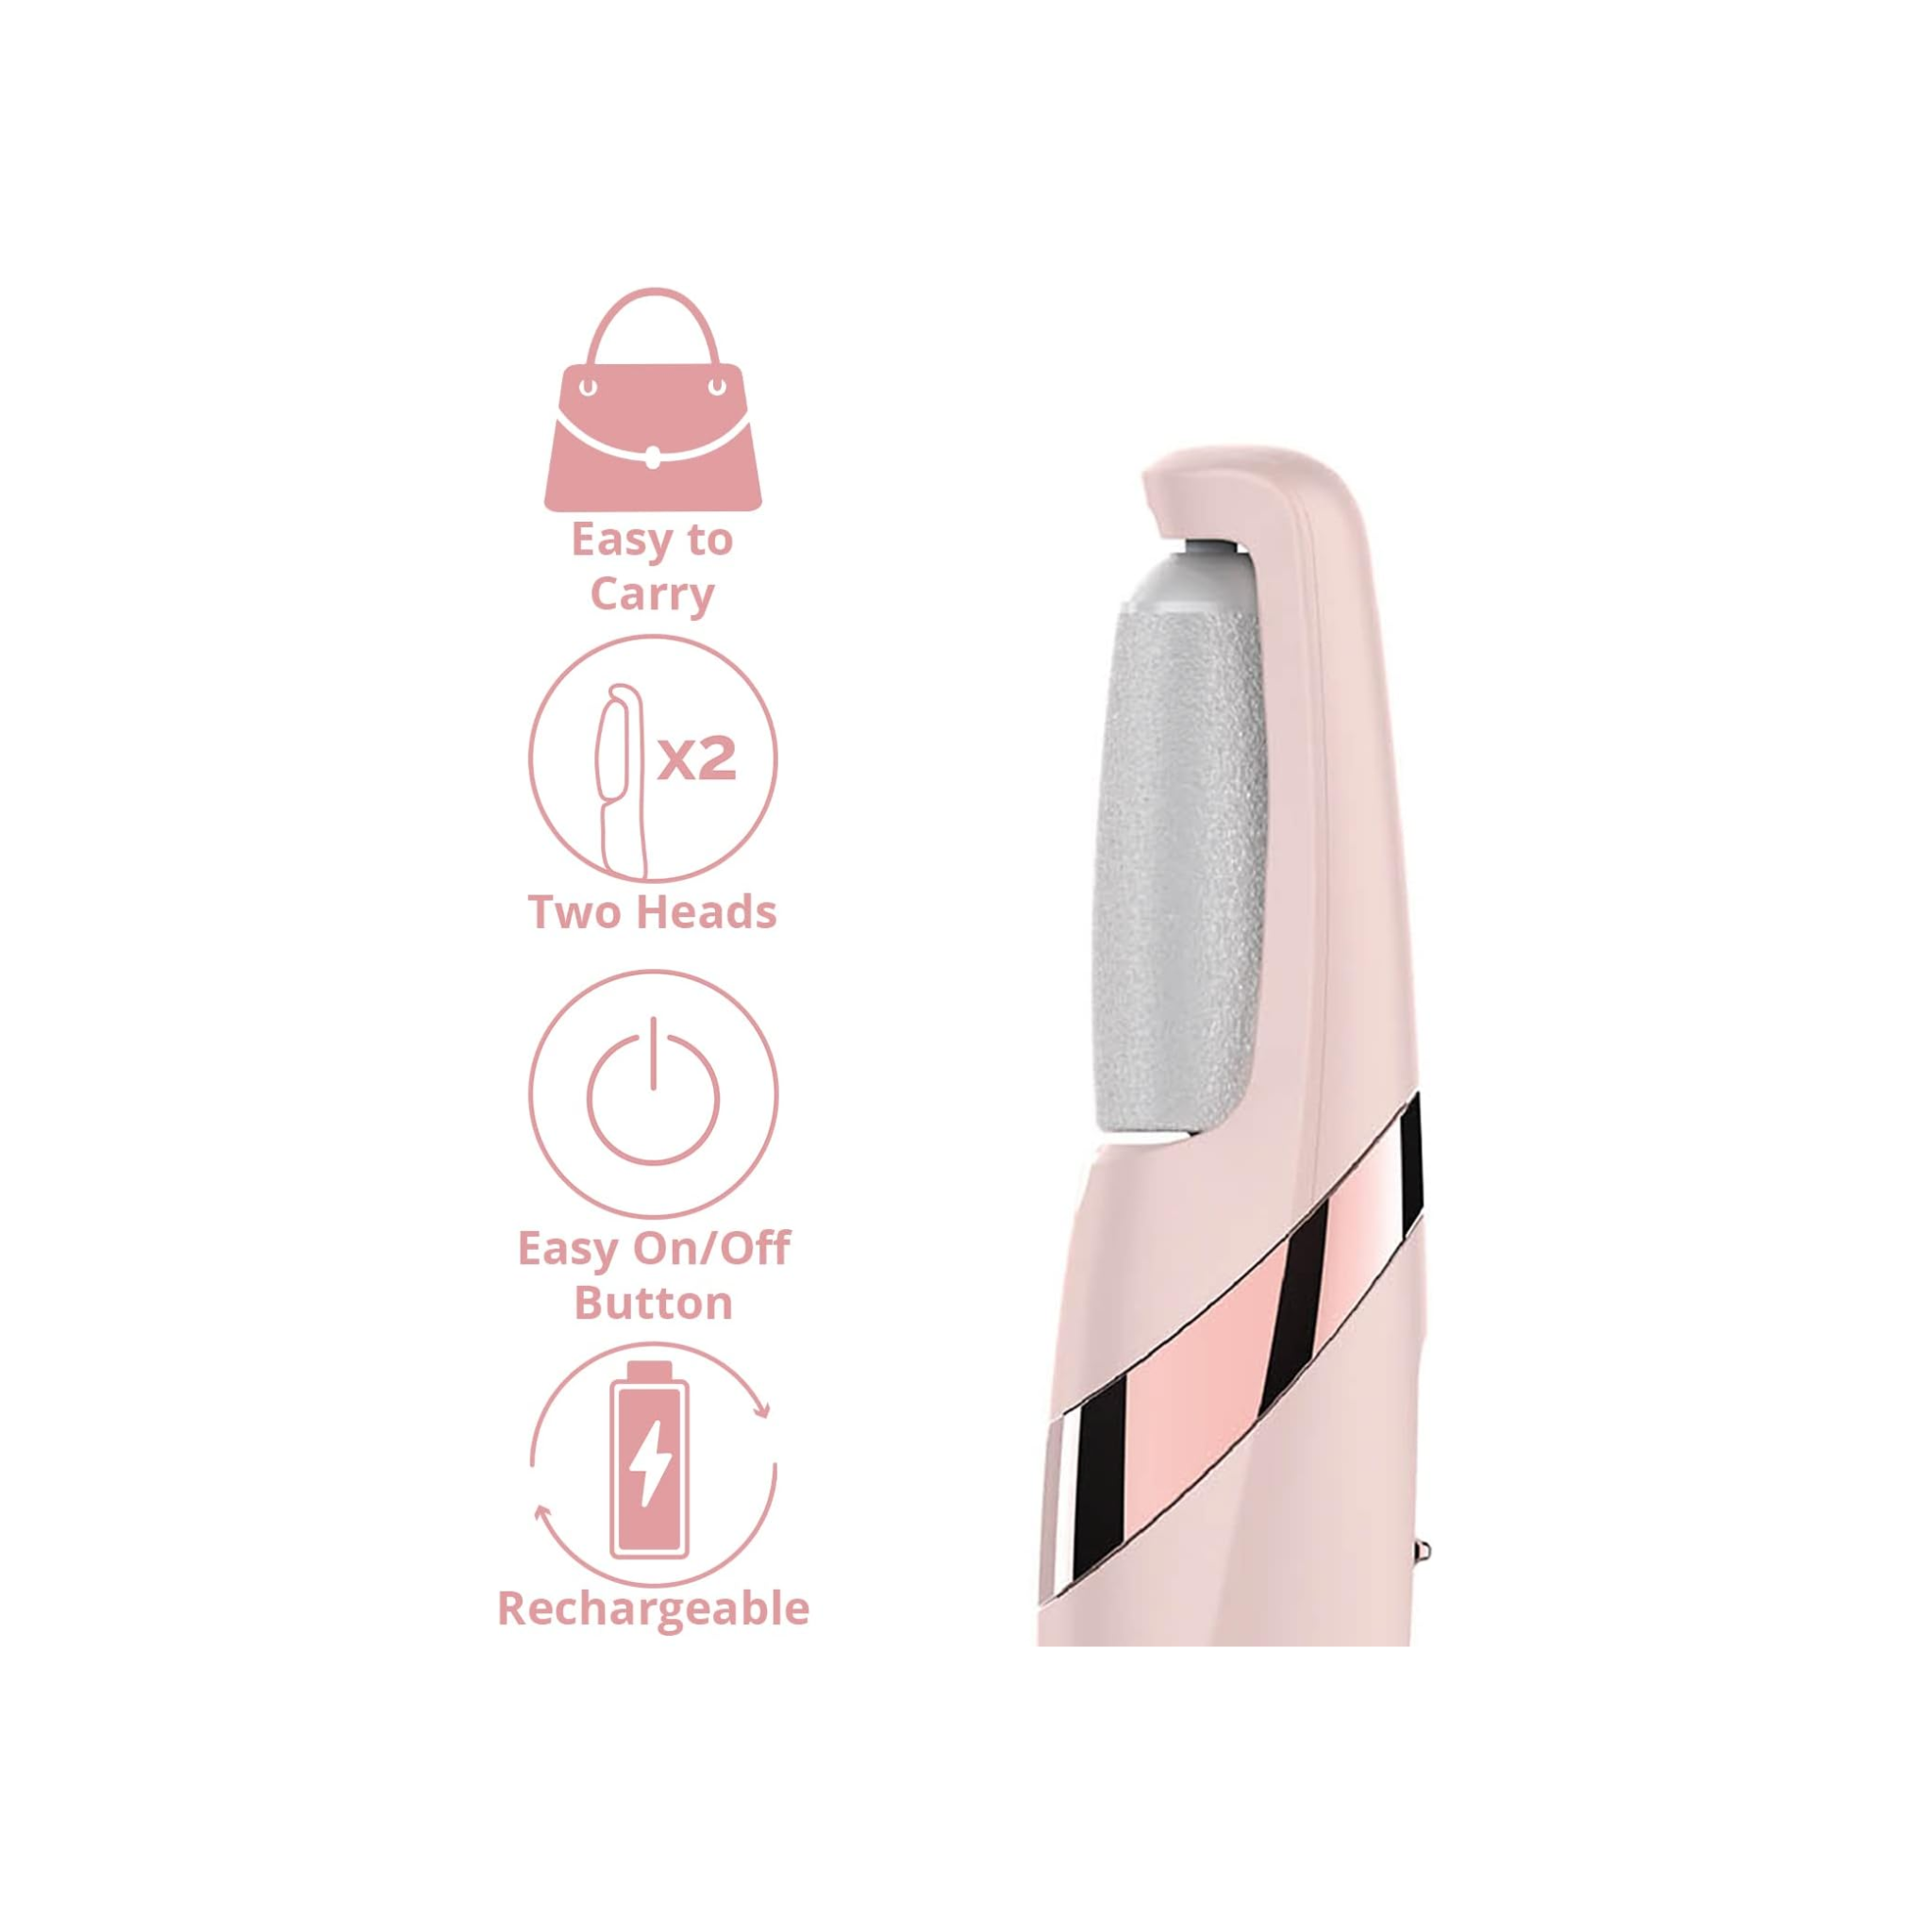 BABAVISTA™ Finishing Touch Flawless Pedi - Rechargeable Electric Callus Remover Tool for an at-Home Spa Pedicure Experience - Removes Dry Skin for Smoother Feet